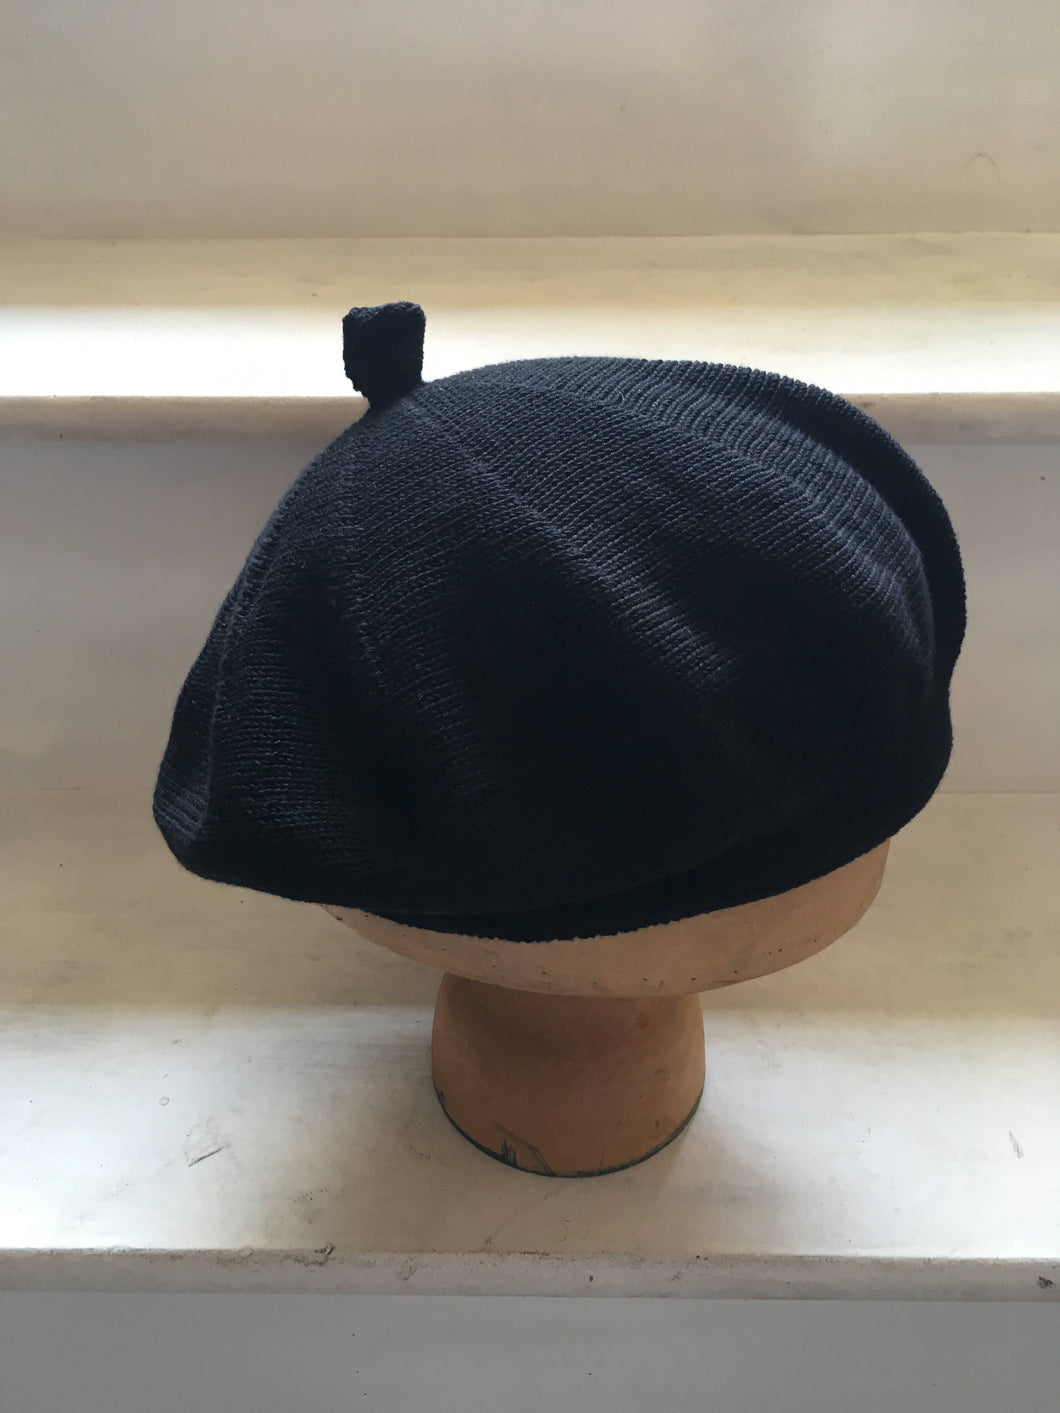 Black Cotton Knitted French Style Beret with Tab at Top and Rolled Hem, by Lord and Taft